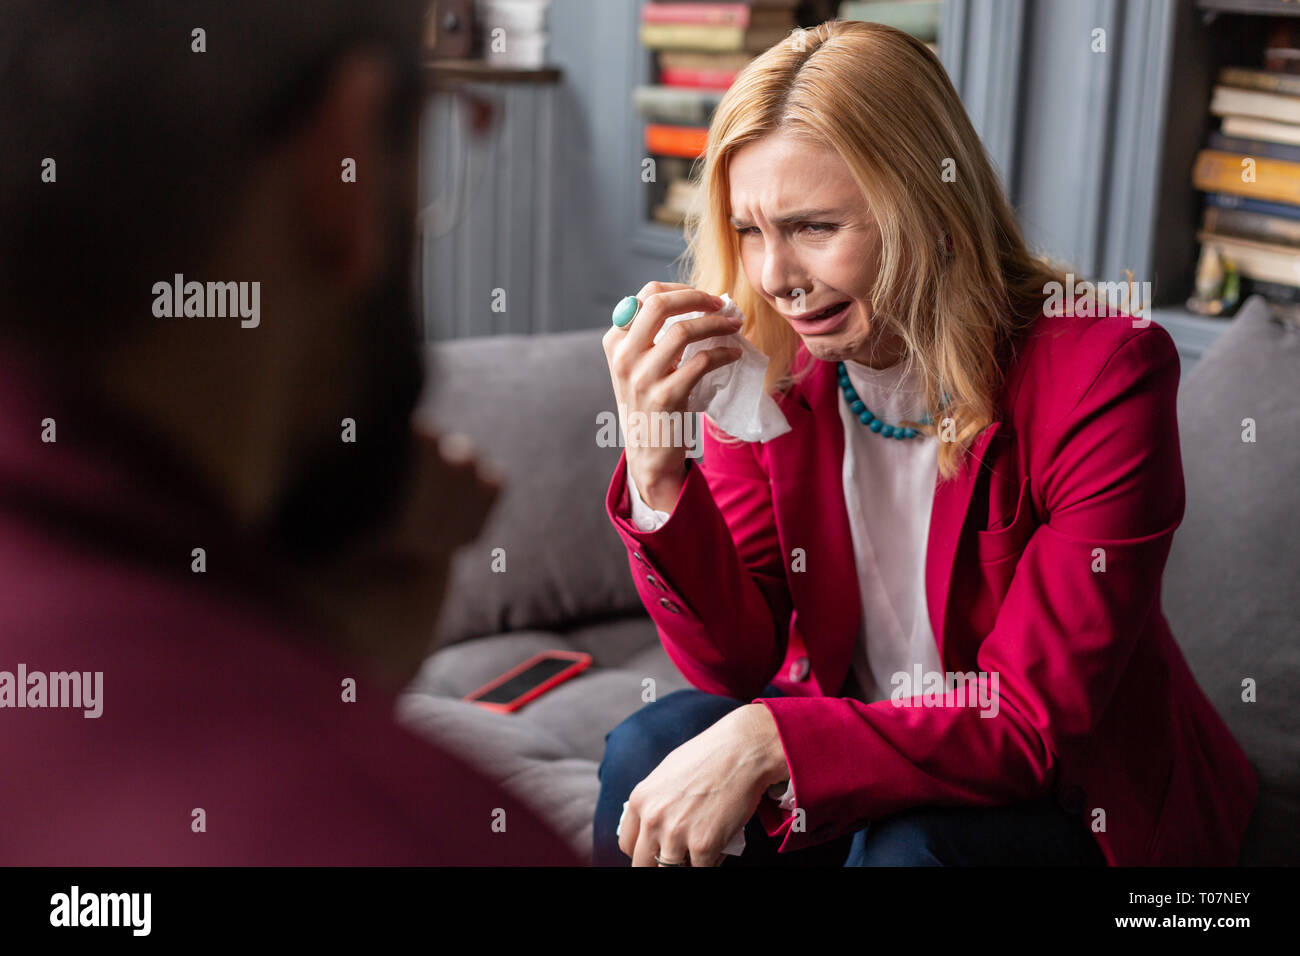 Blonde woman wearing accessories crying visiting therapist Stock Photo